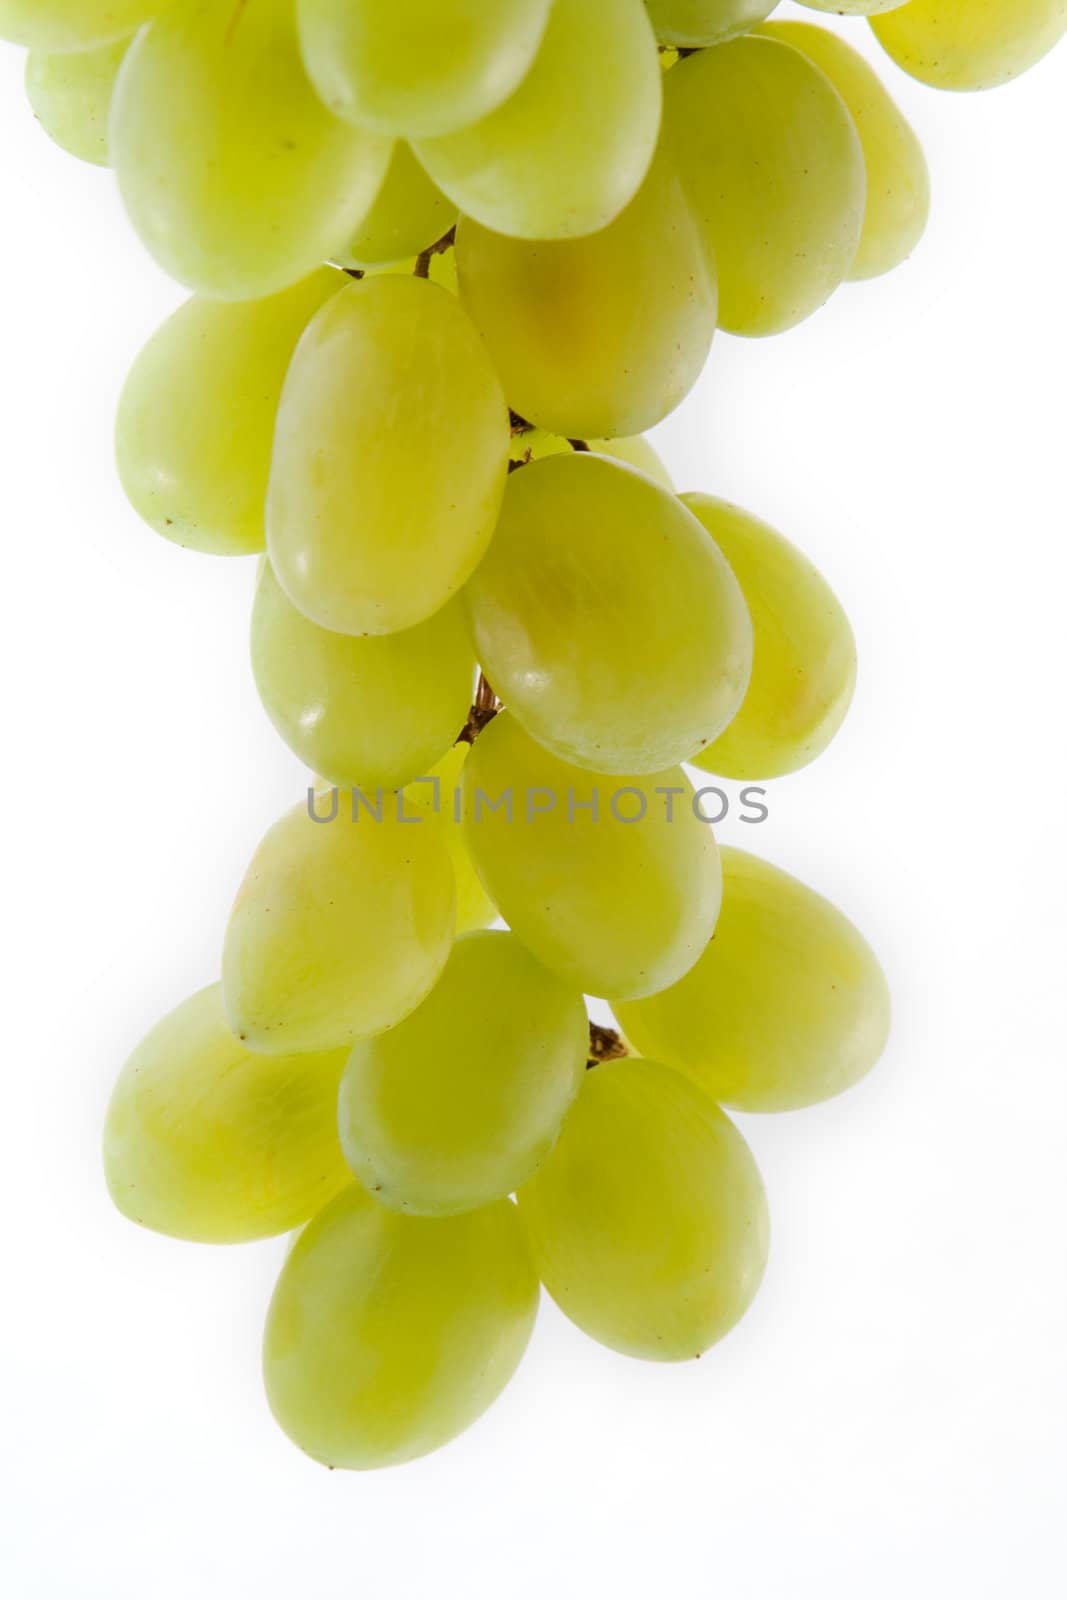 	
bunch of fresh green grapes on a white background